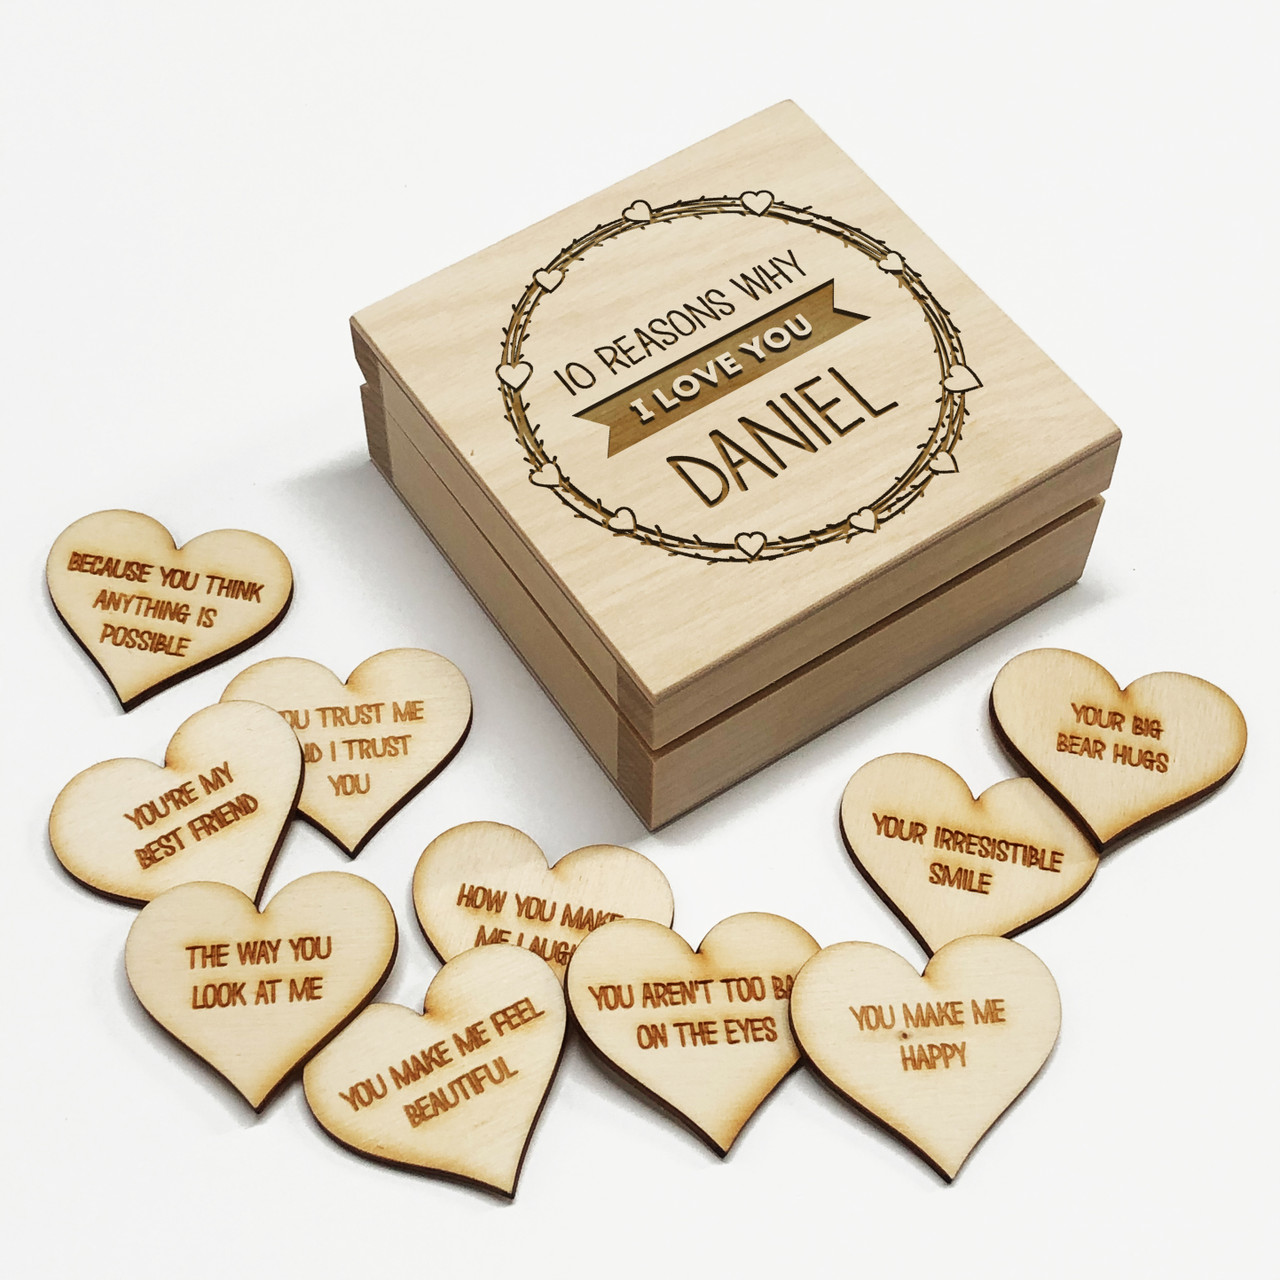 10 Reasons Why I Love You Wooden Box and Hearts Personalised